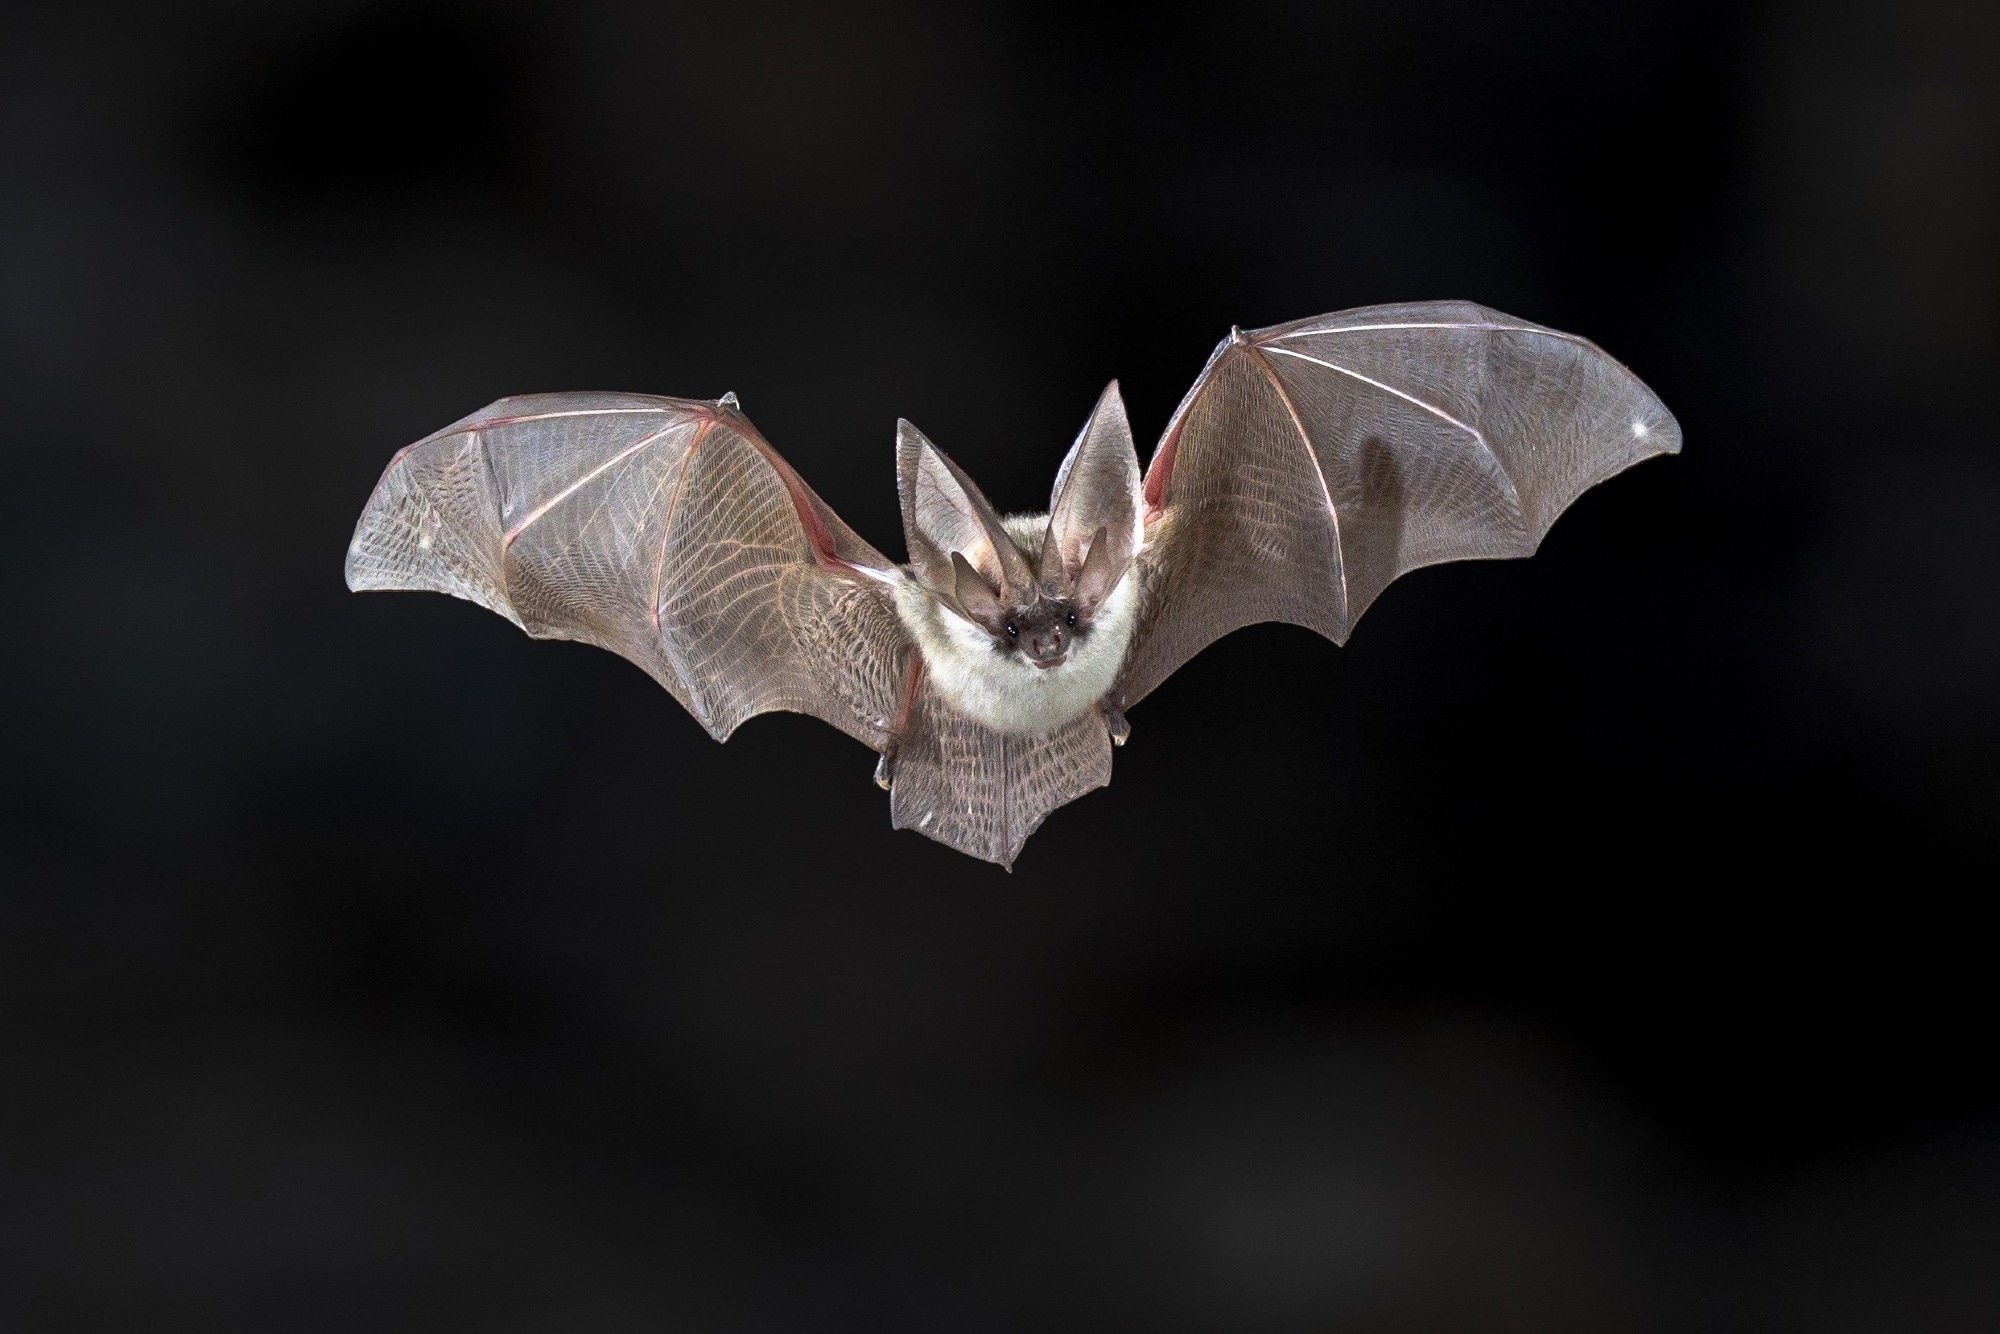 Study: Experimental evidence for cancer resistance in a bat species. Image Credit: Rudmer Zwerver / Shutterstock